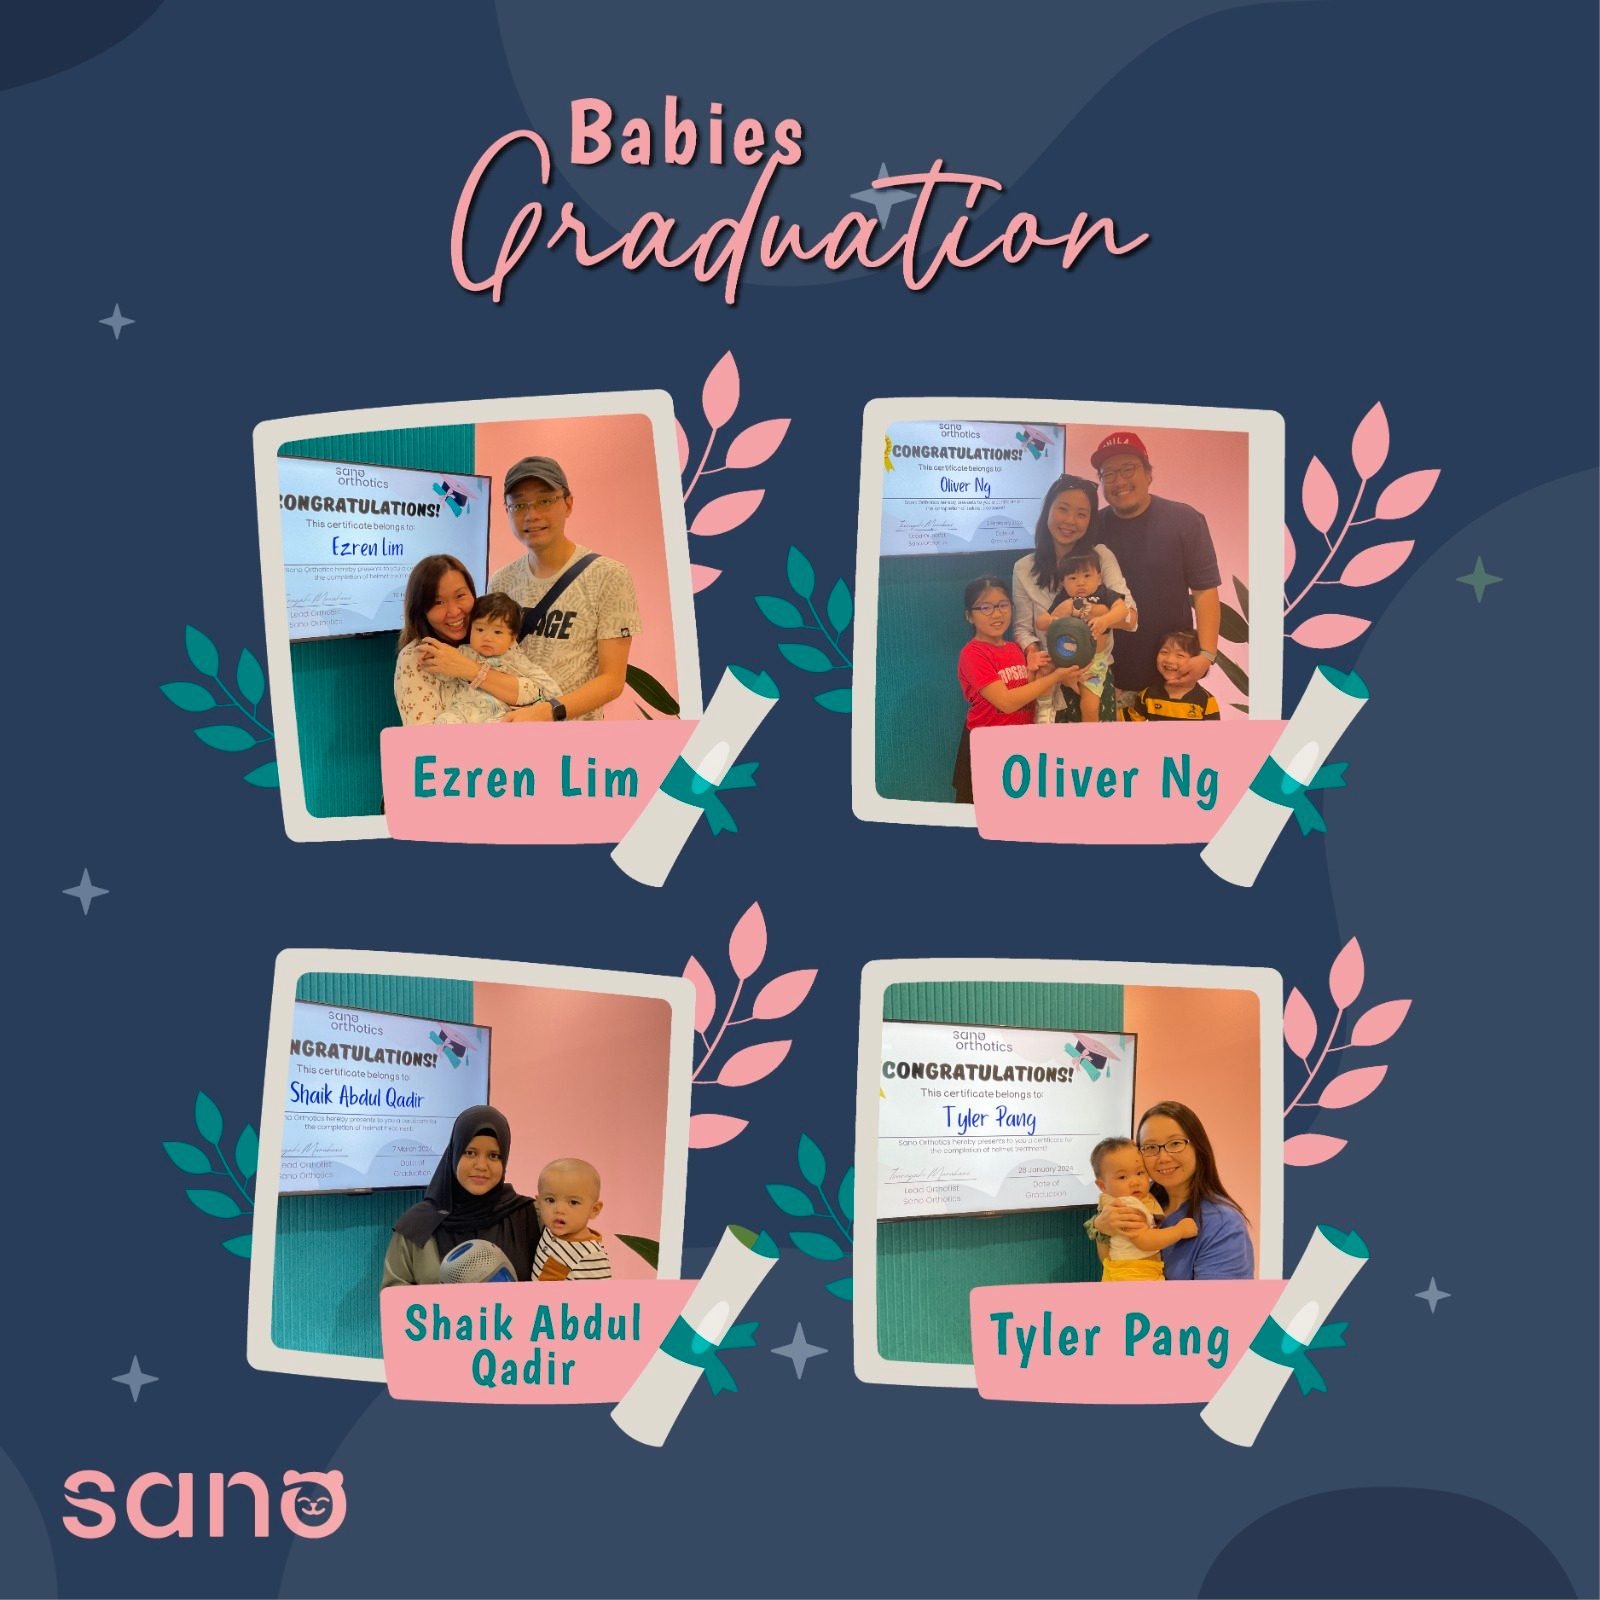 Mission accomplished! No more helmets for our little graduates! 🎓🎉

Thank you for putting your trust in us! We look forward to seeing more smiles in the future! 😊

#sanoorthotics #sanoortho #babygraduation #happy #congrats